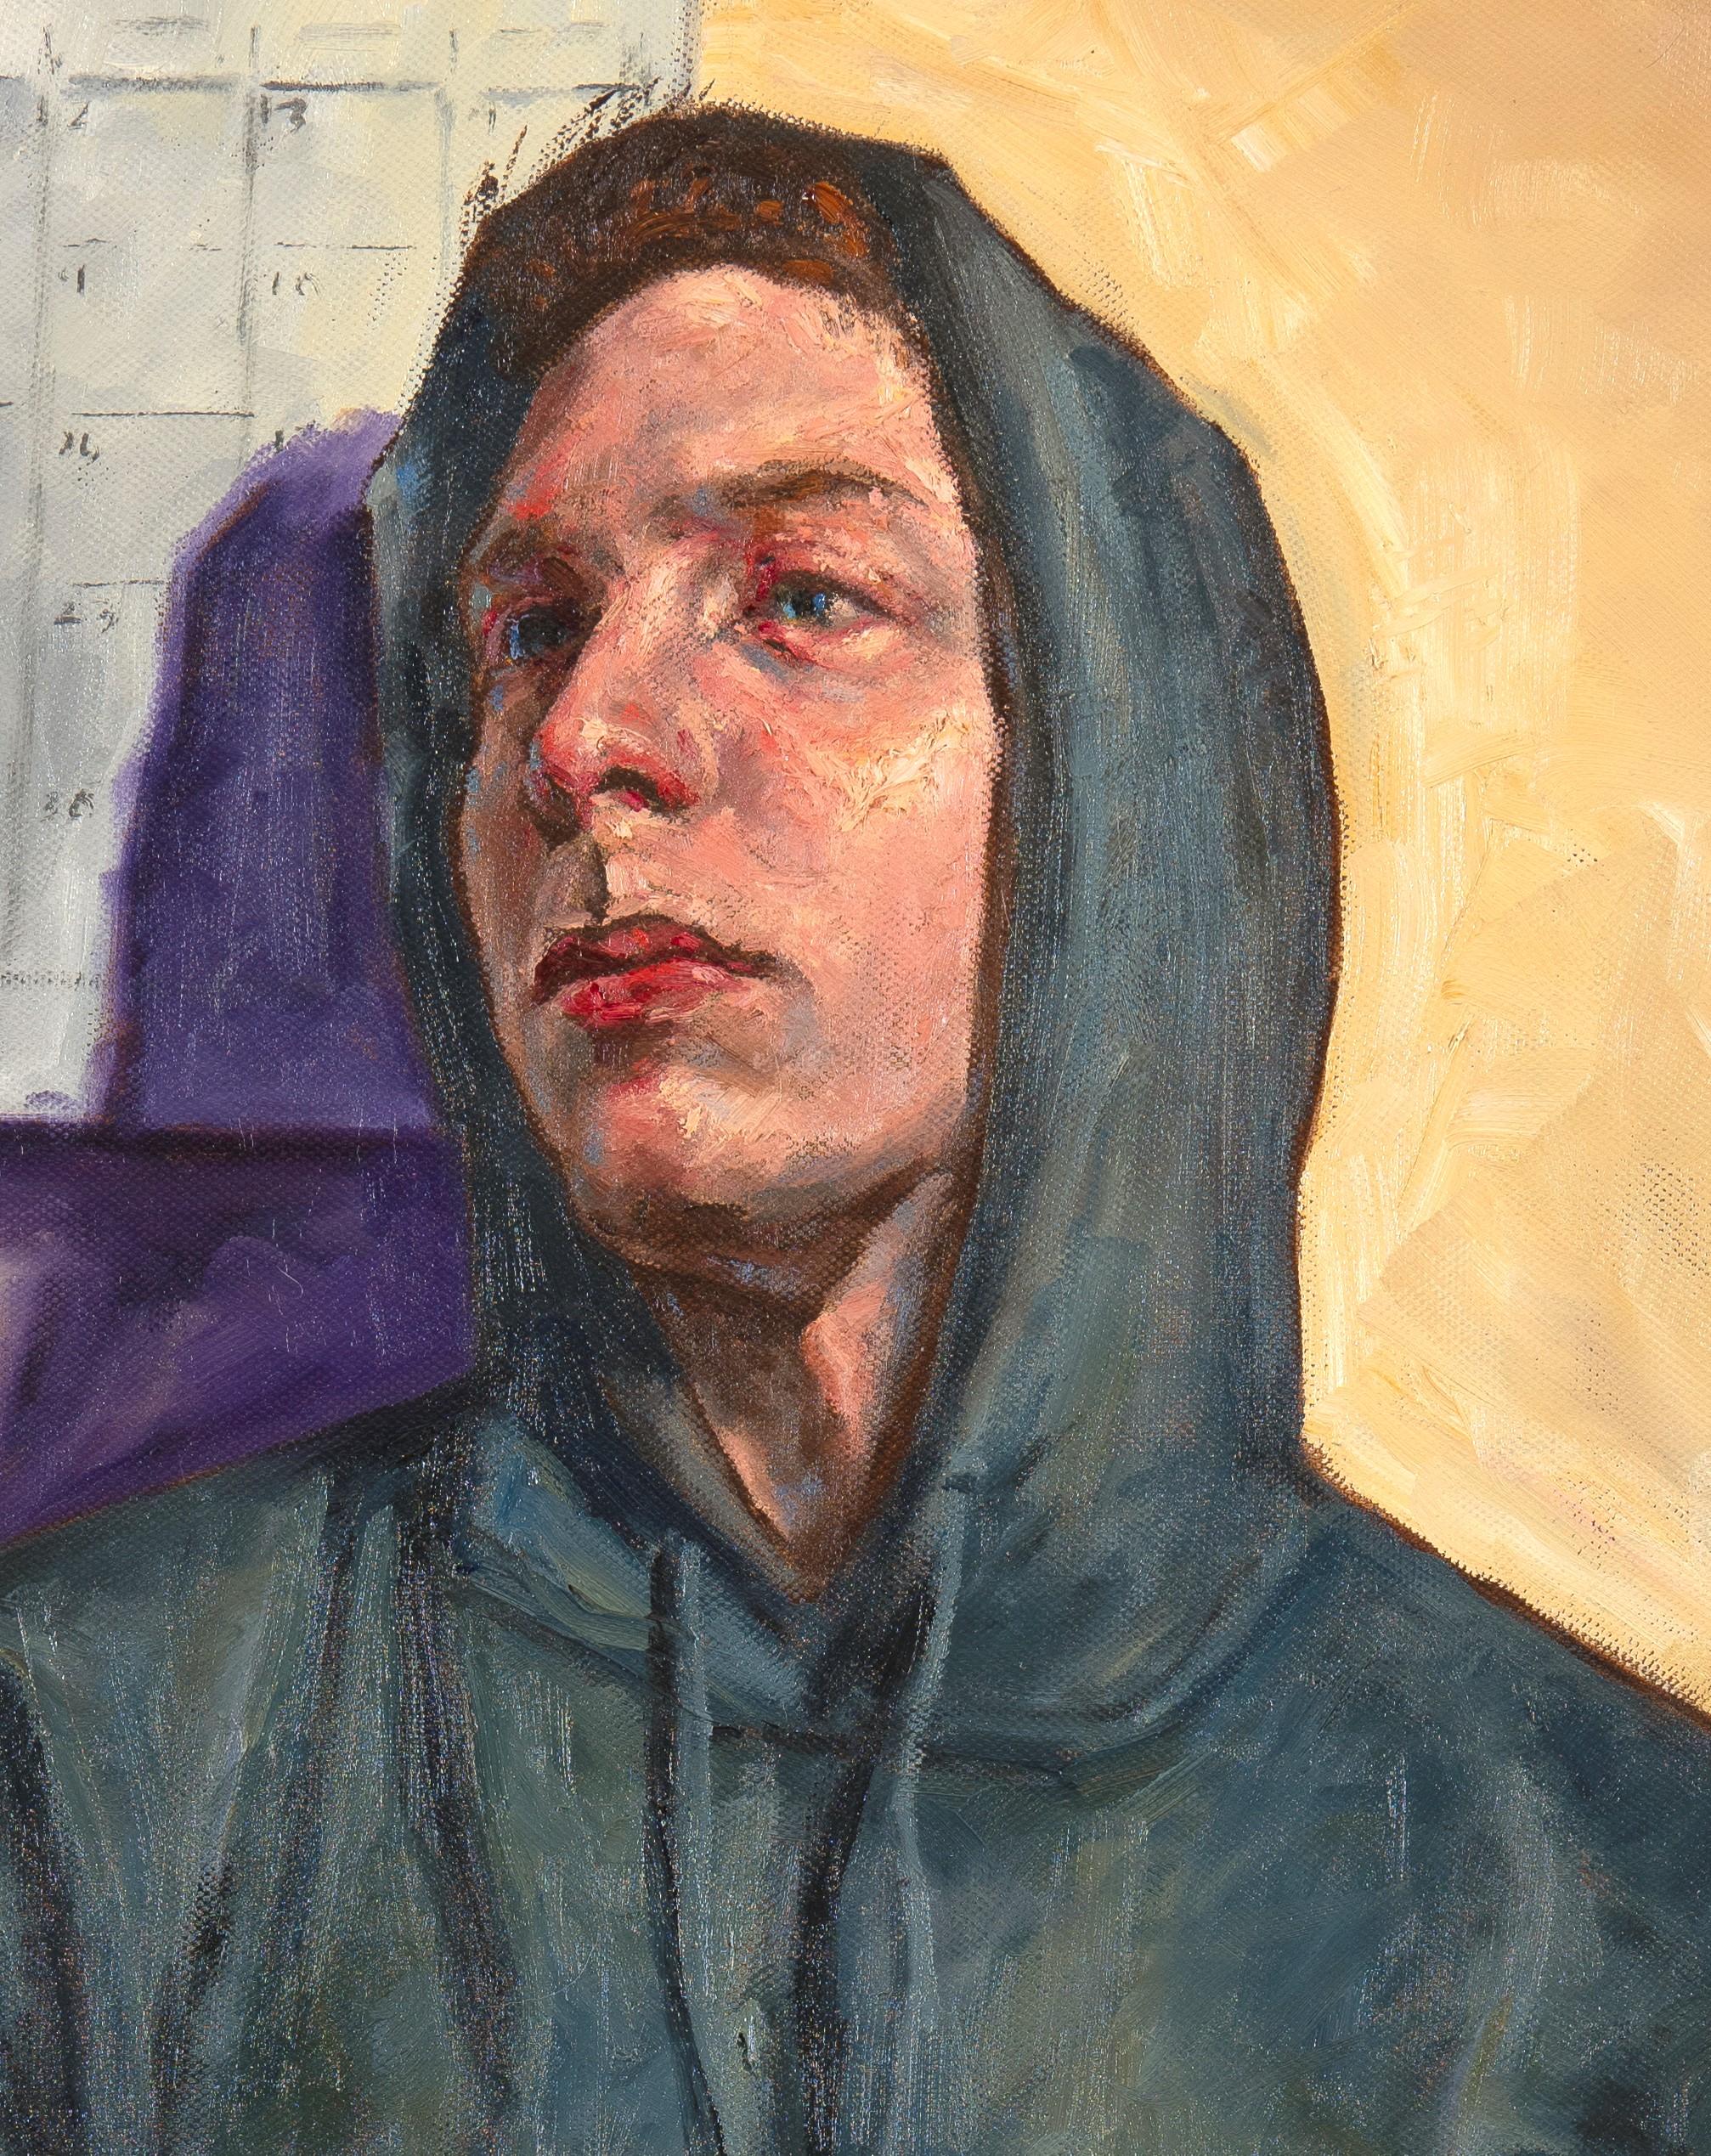 Portrait of William, April, 2020, Seated Male Wearing Gray Hoodie, Original Oil - Painting by Peter Lupkin